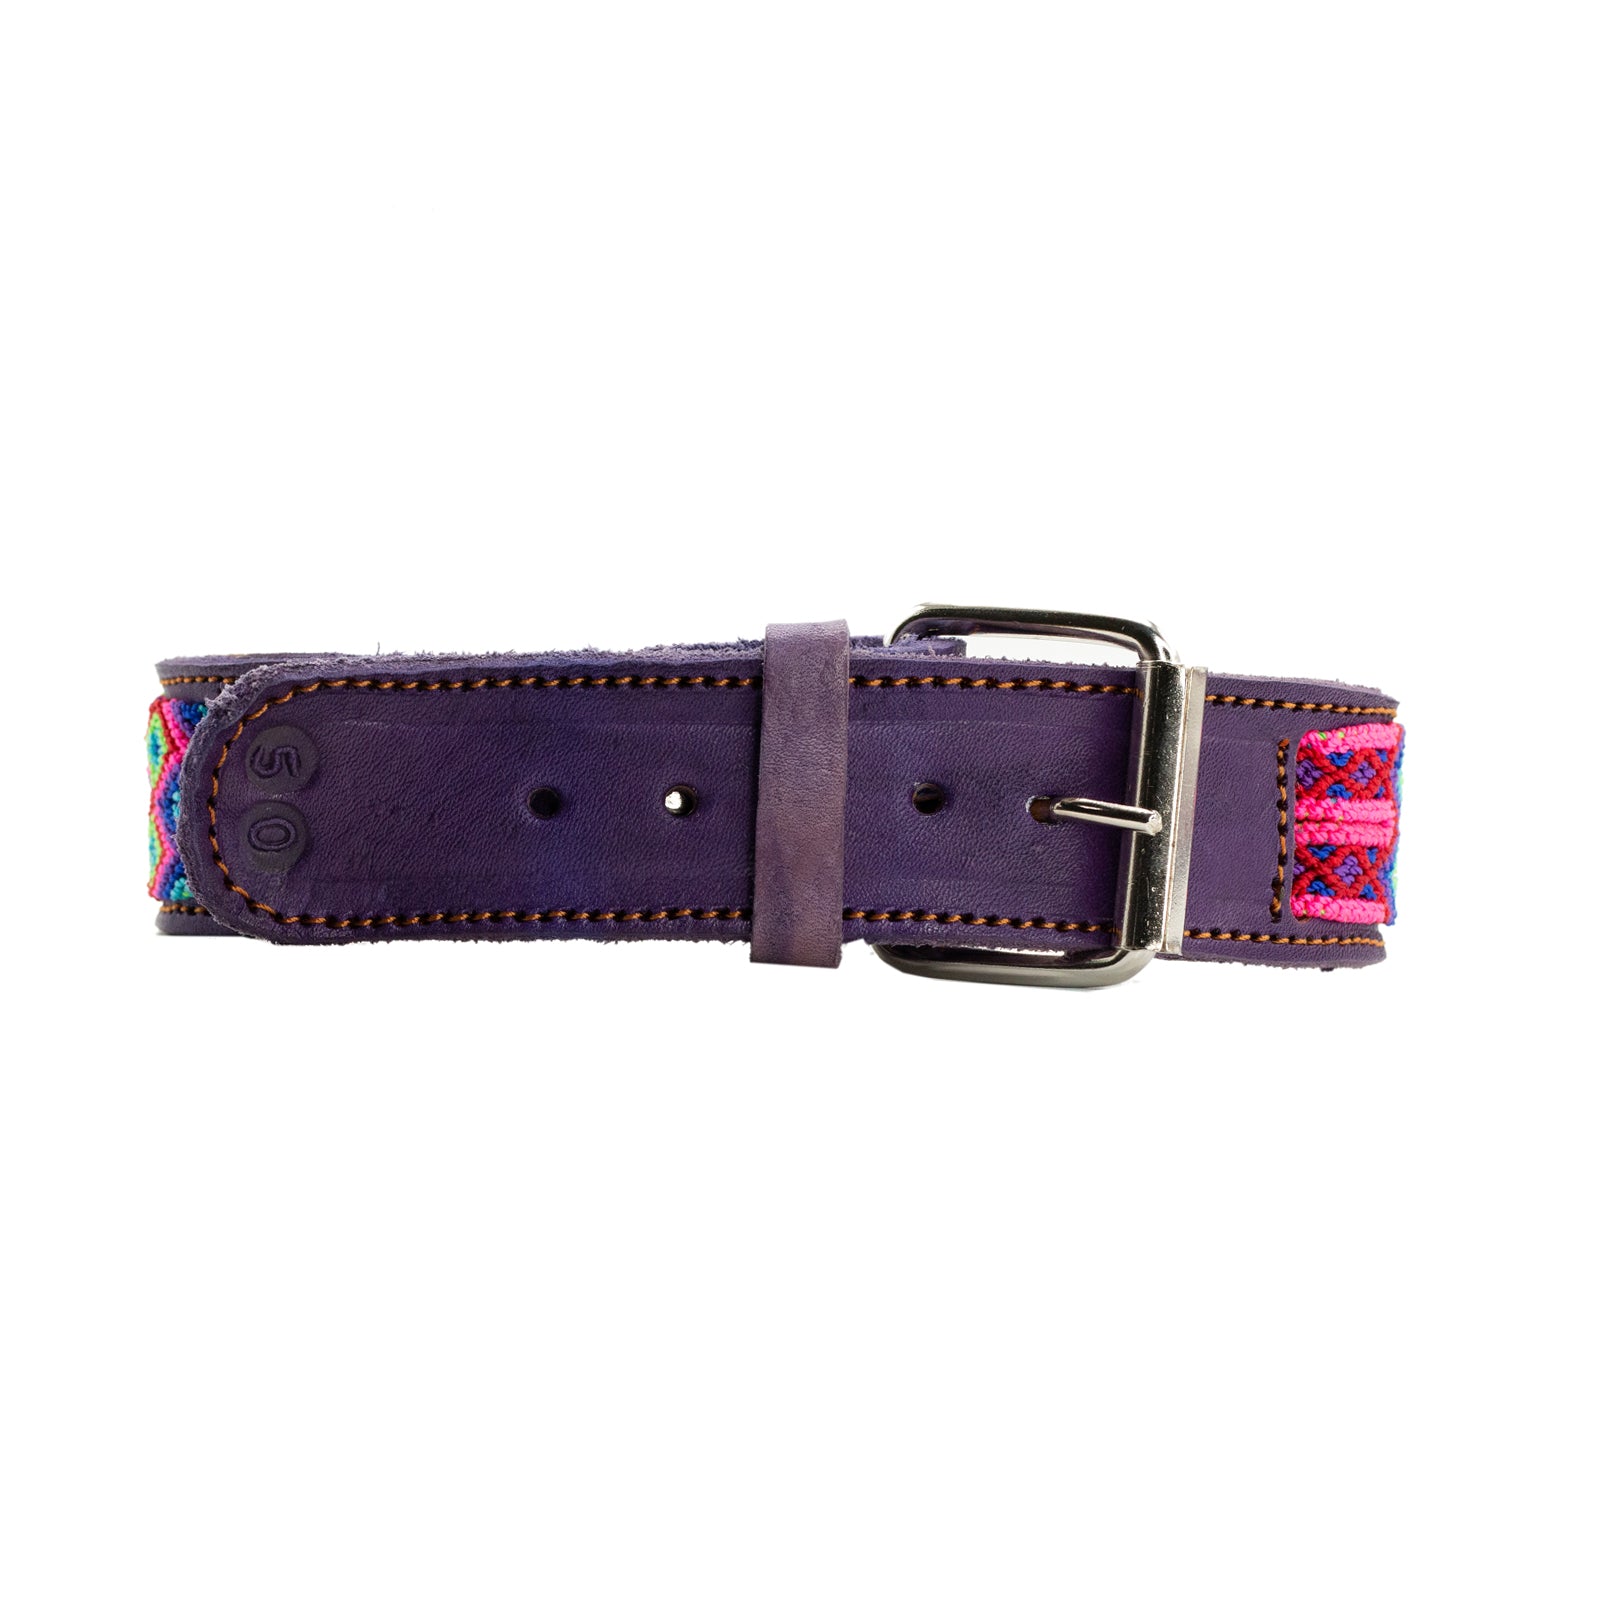 Traditional Mexican-inspired design on a custom pet collar